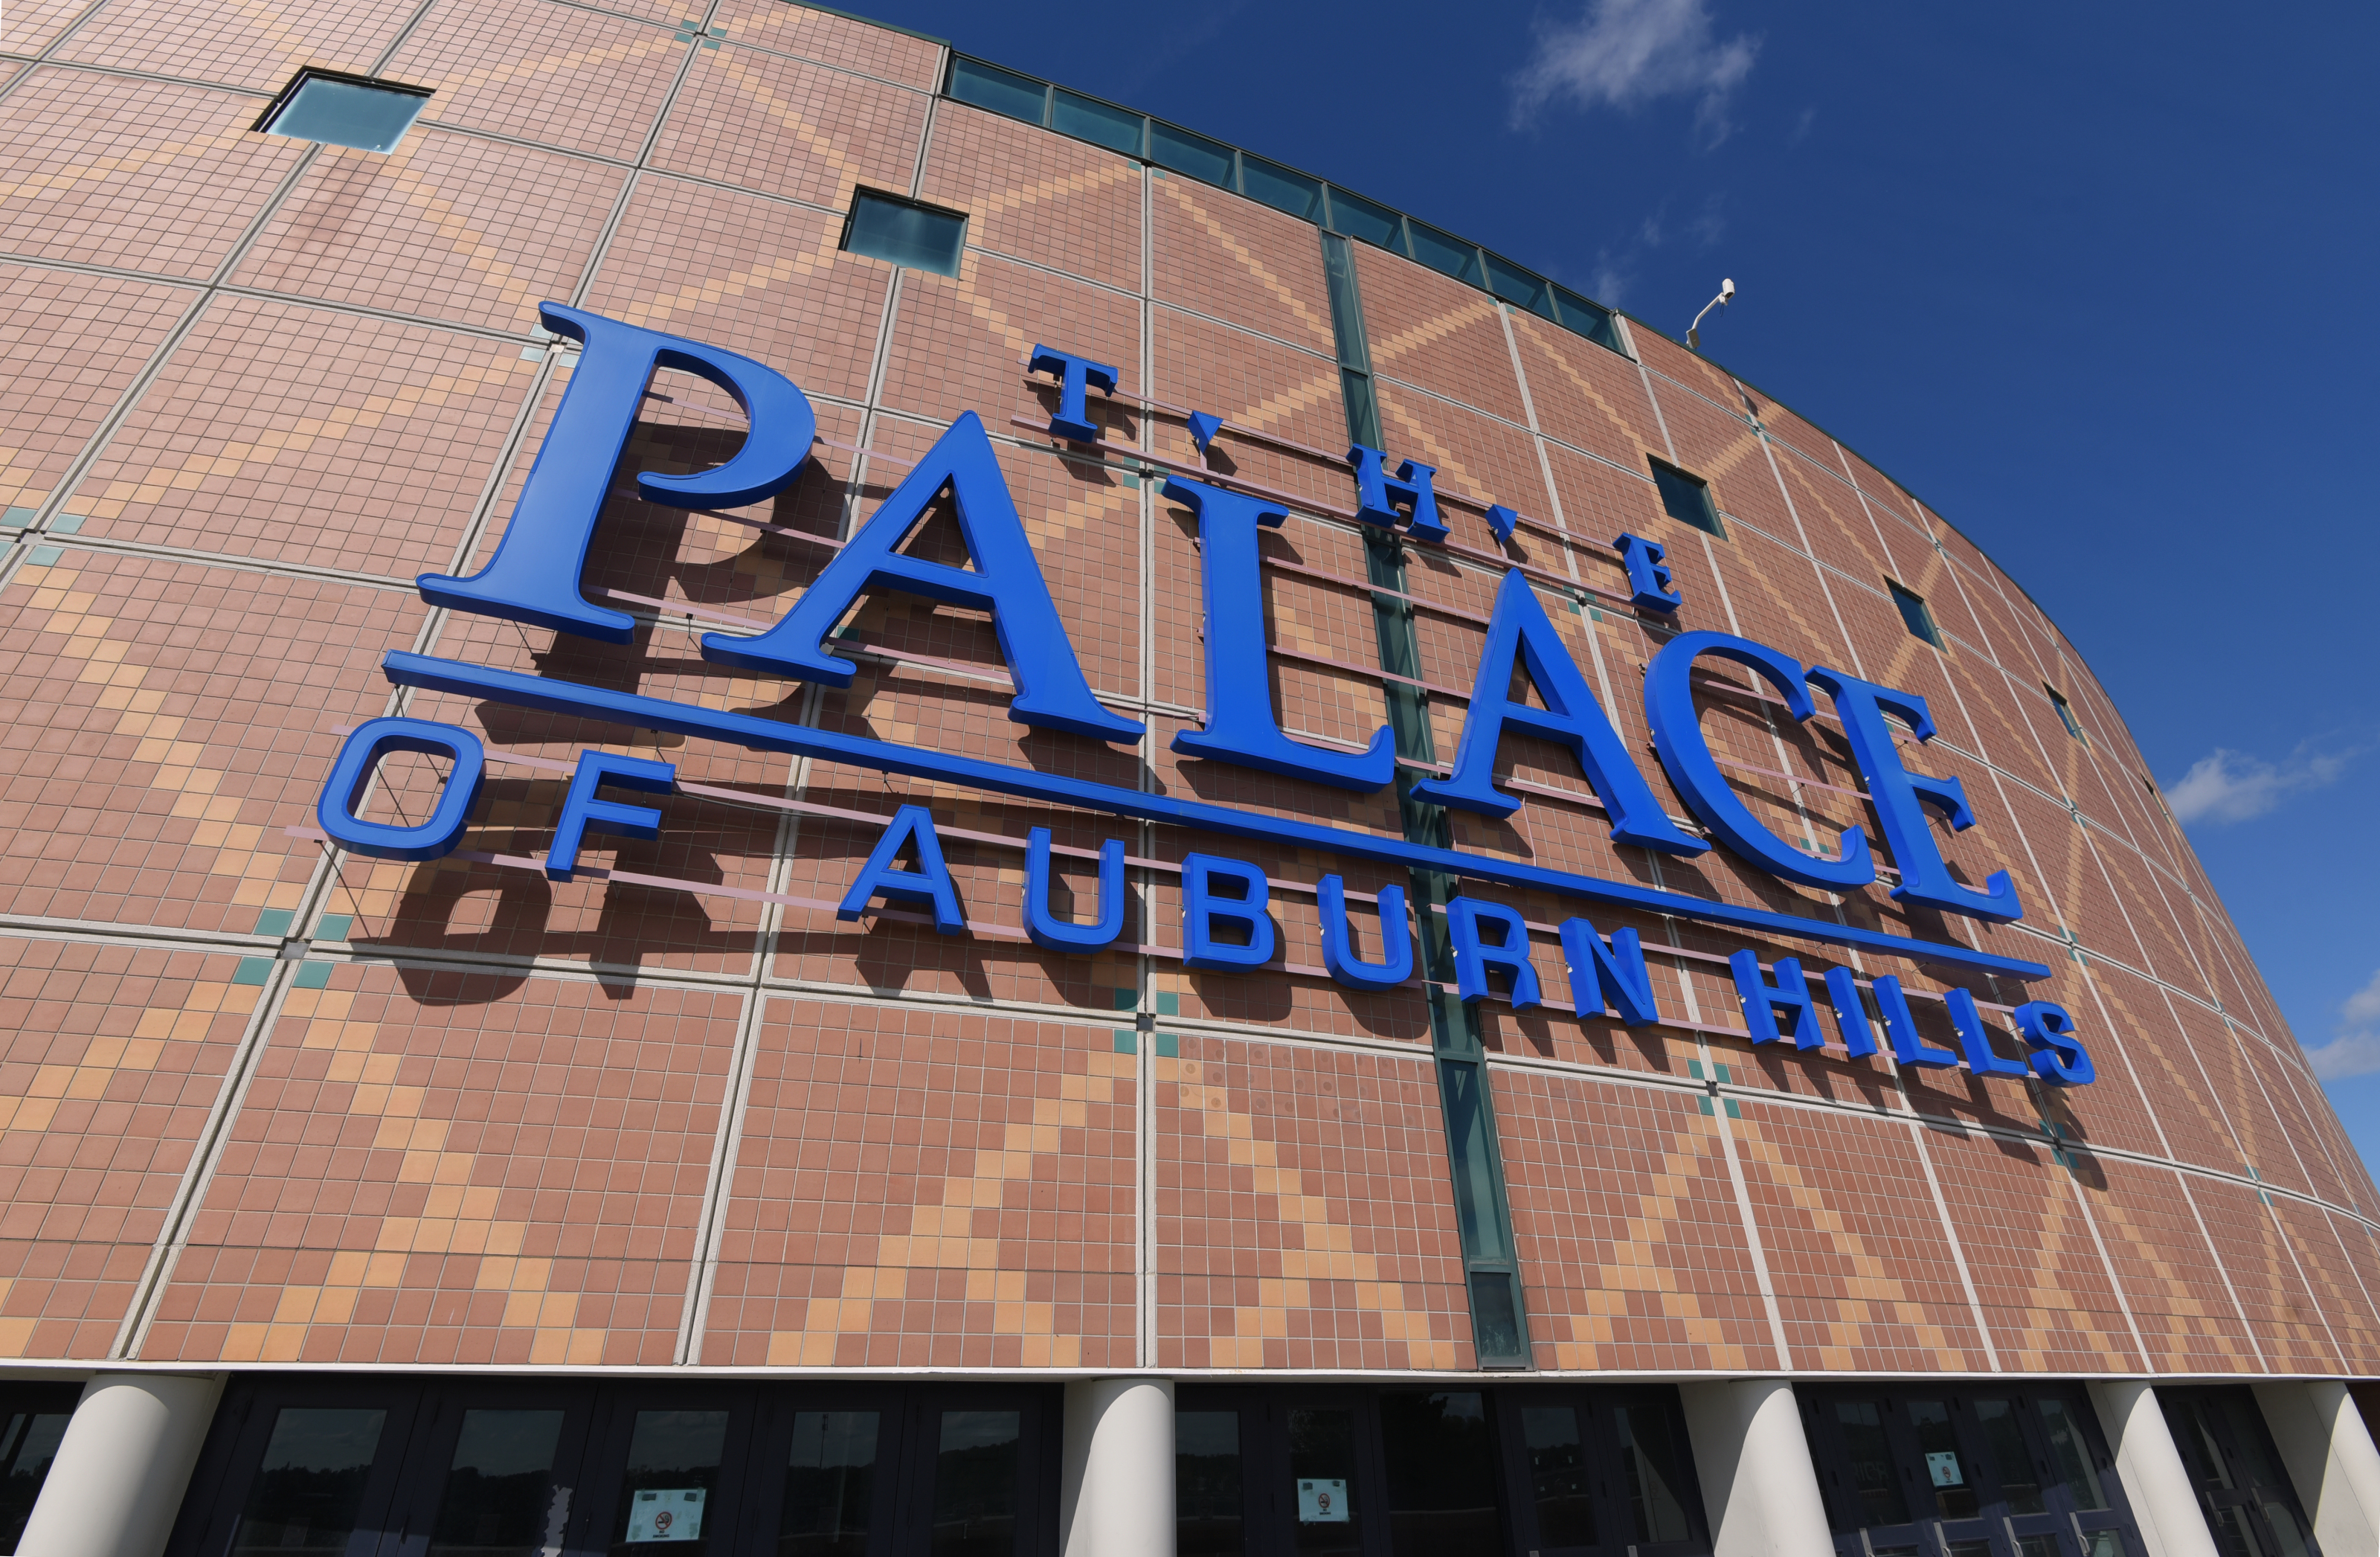 Detroit Pistons: Rest in Peace the Palace of Auburn Hills